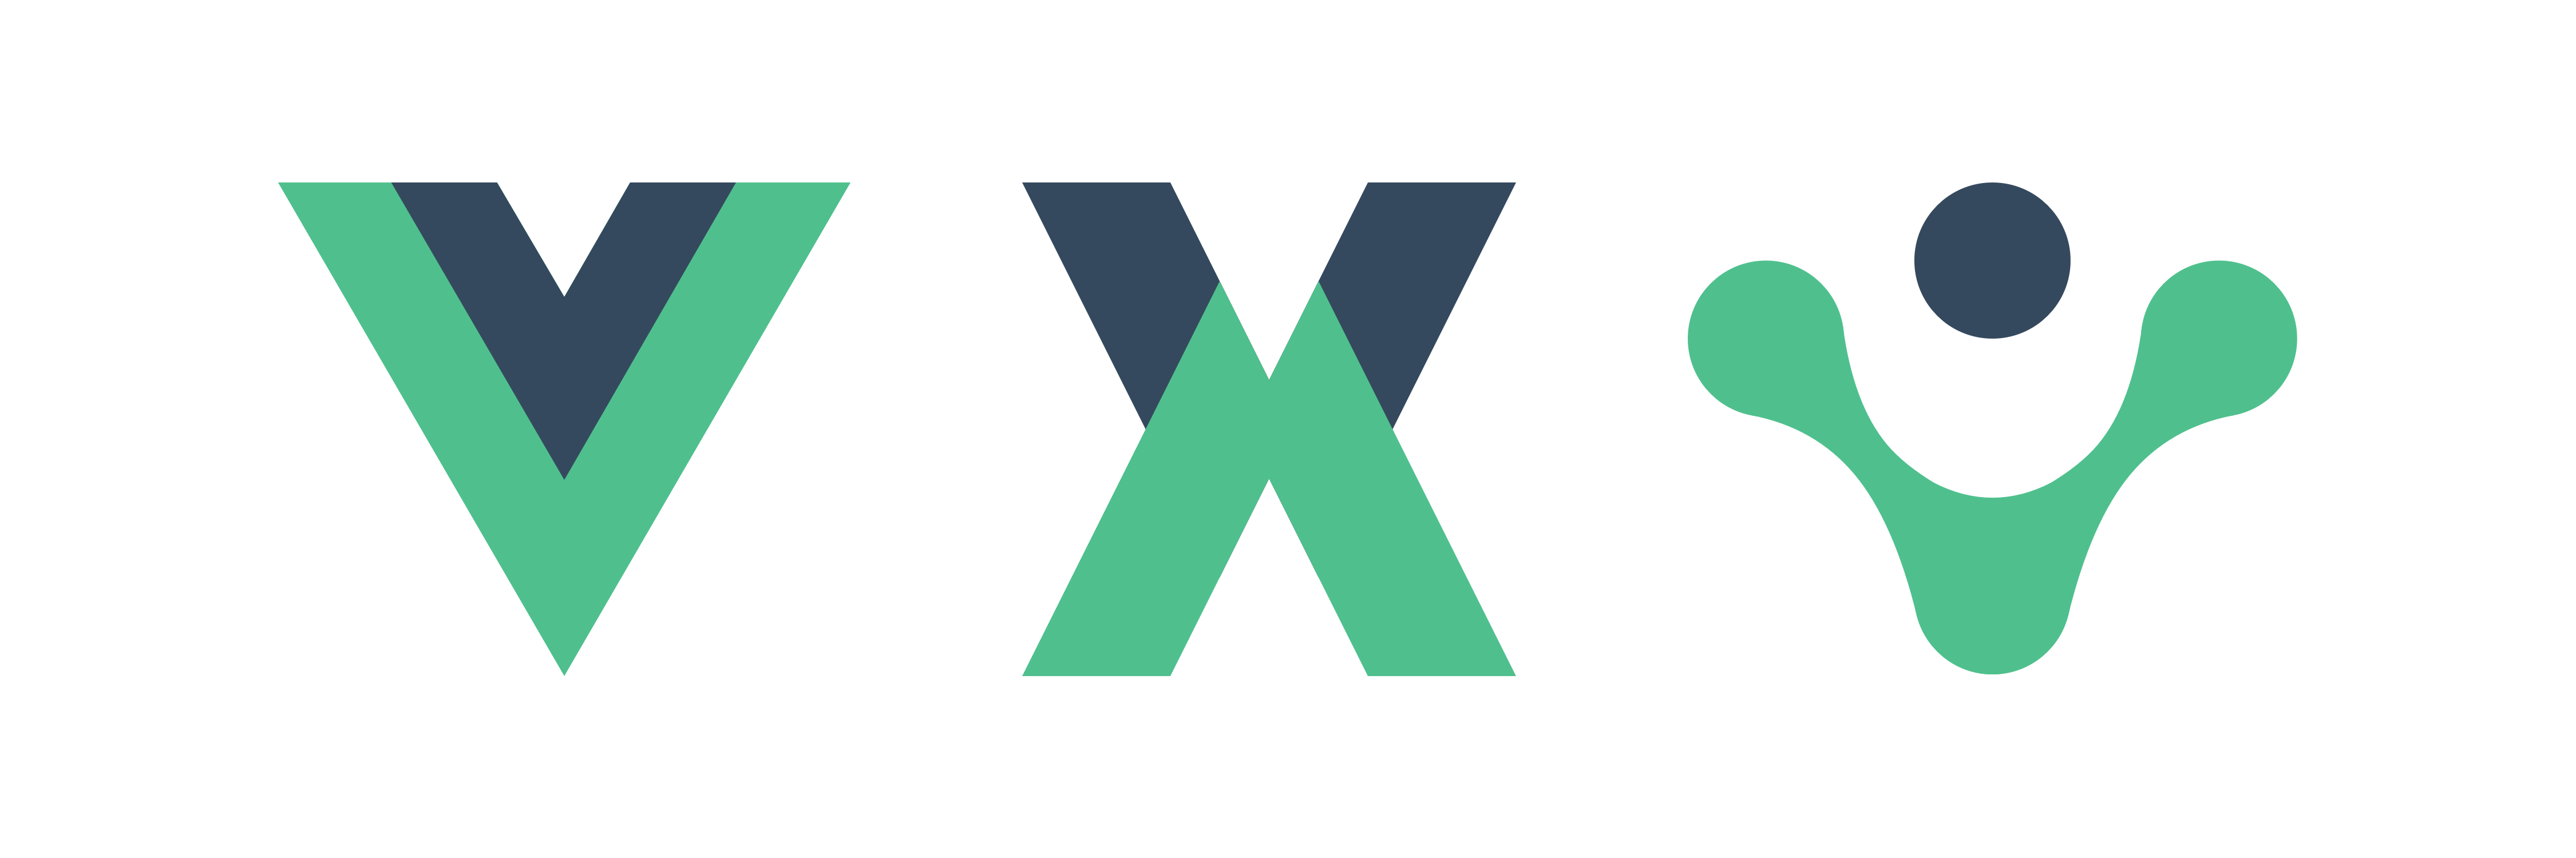 Vue Logo - Logos For Vuex And Vue Router? · Issue · Vuejs Vue · GitHub